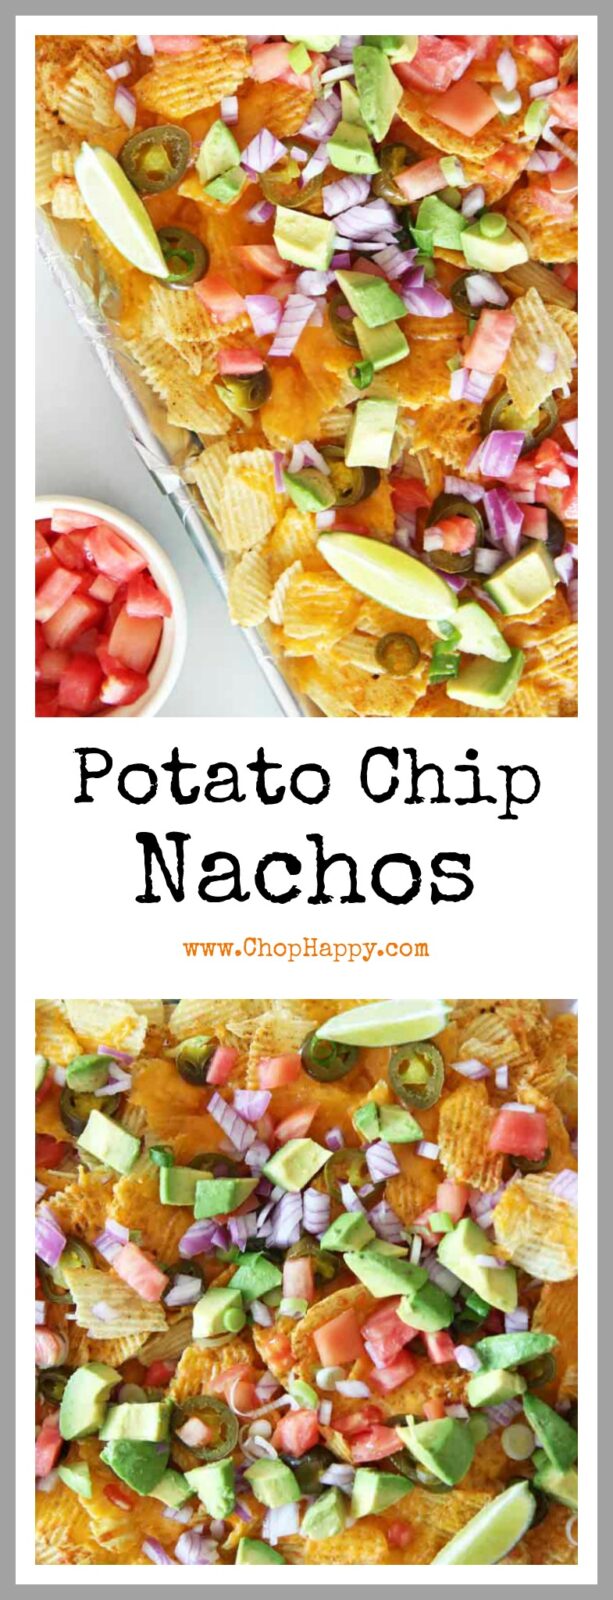 Potato Chip Nacho Recipe - is so fun everyone will smile when it hits the dinner table. Potato chips, seasoning, cheese, and bagged chips makes this easy. www.ChopHappy.com